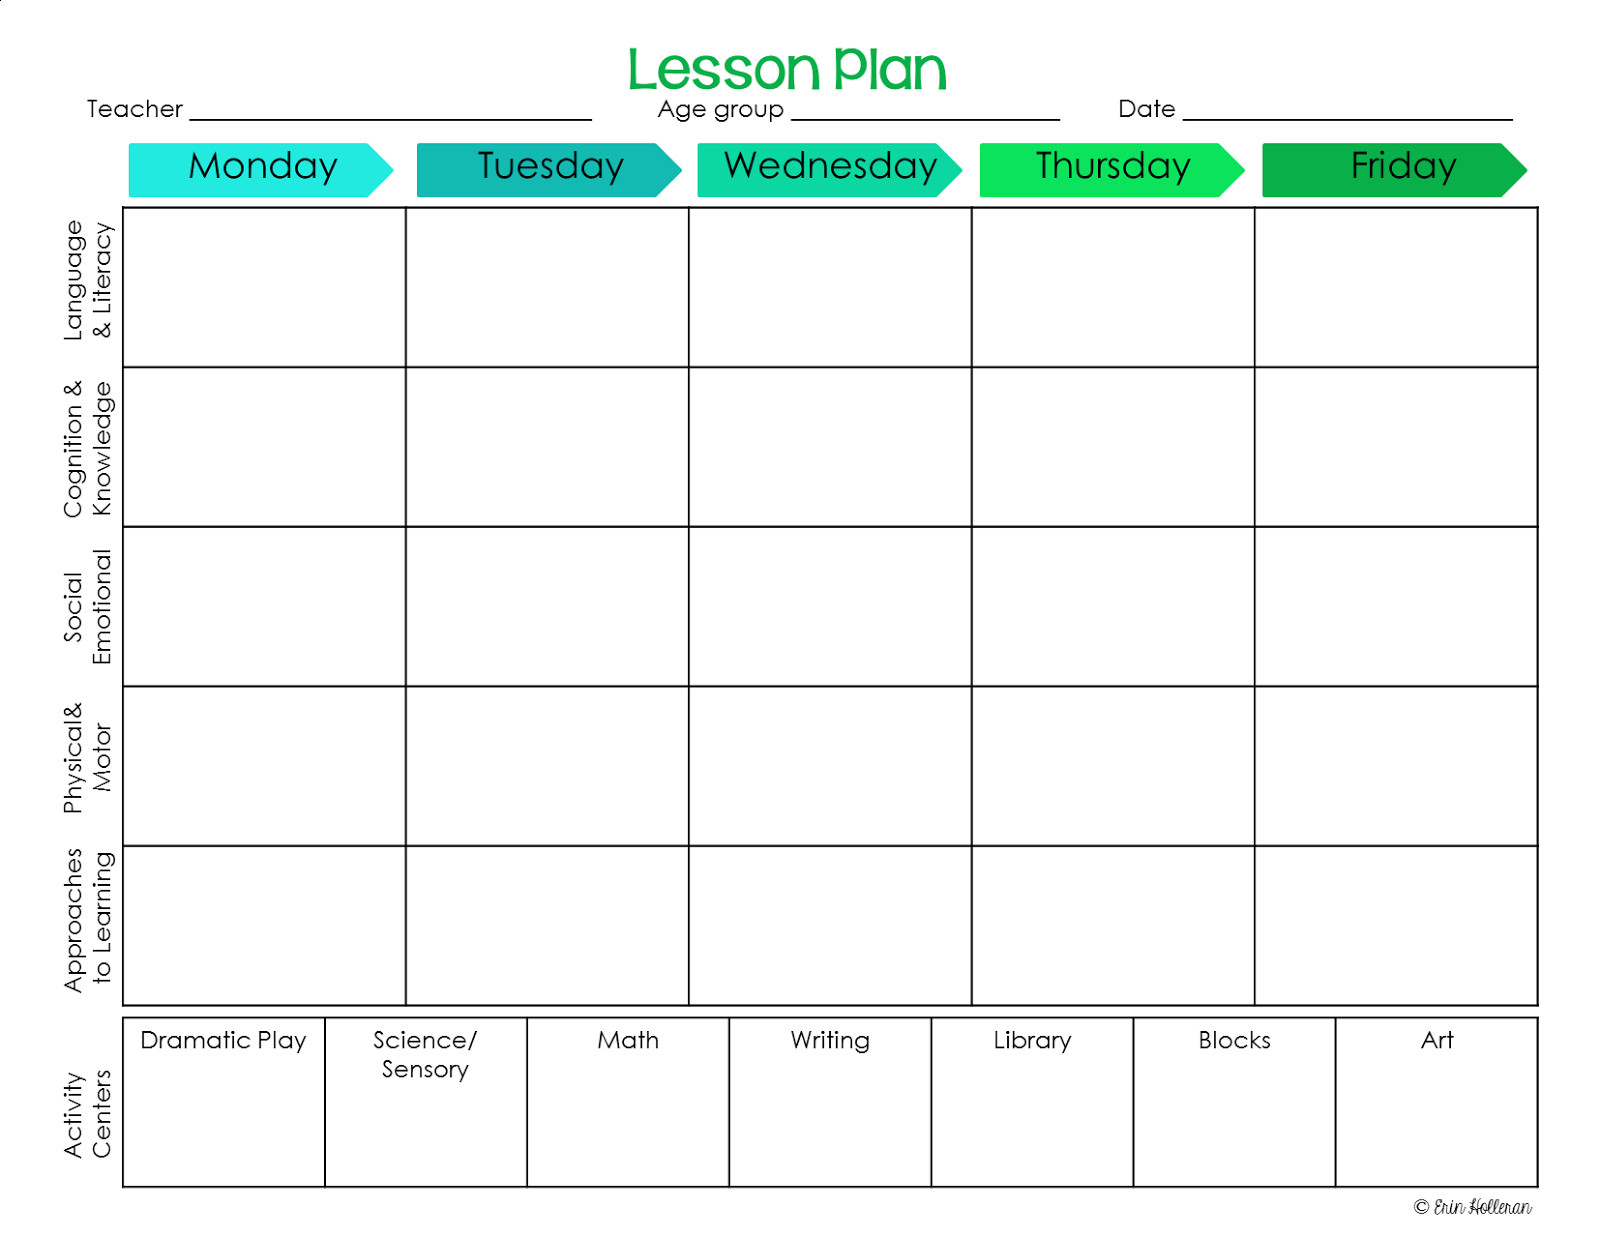 Preschool Weekly Lesson Plan Template Preschool Ponderings Make Your Lesson Plans Work for You